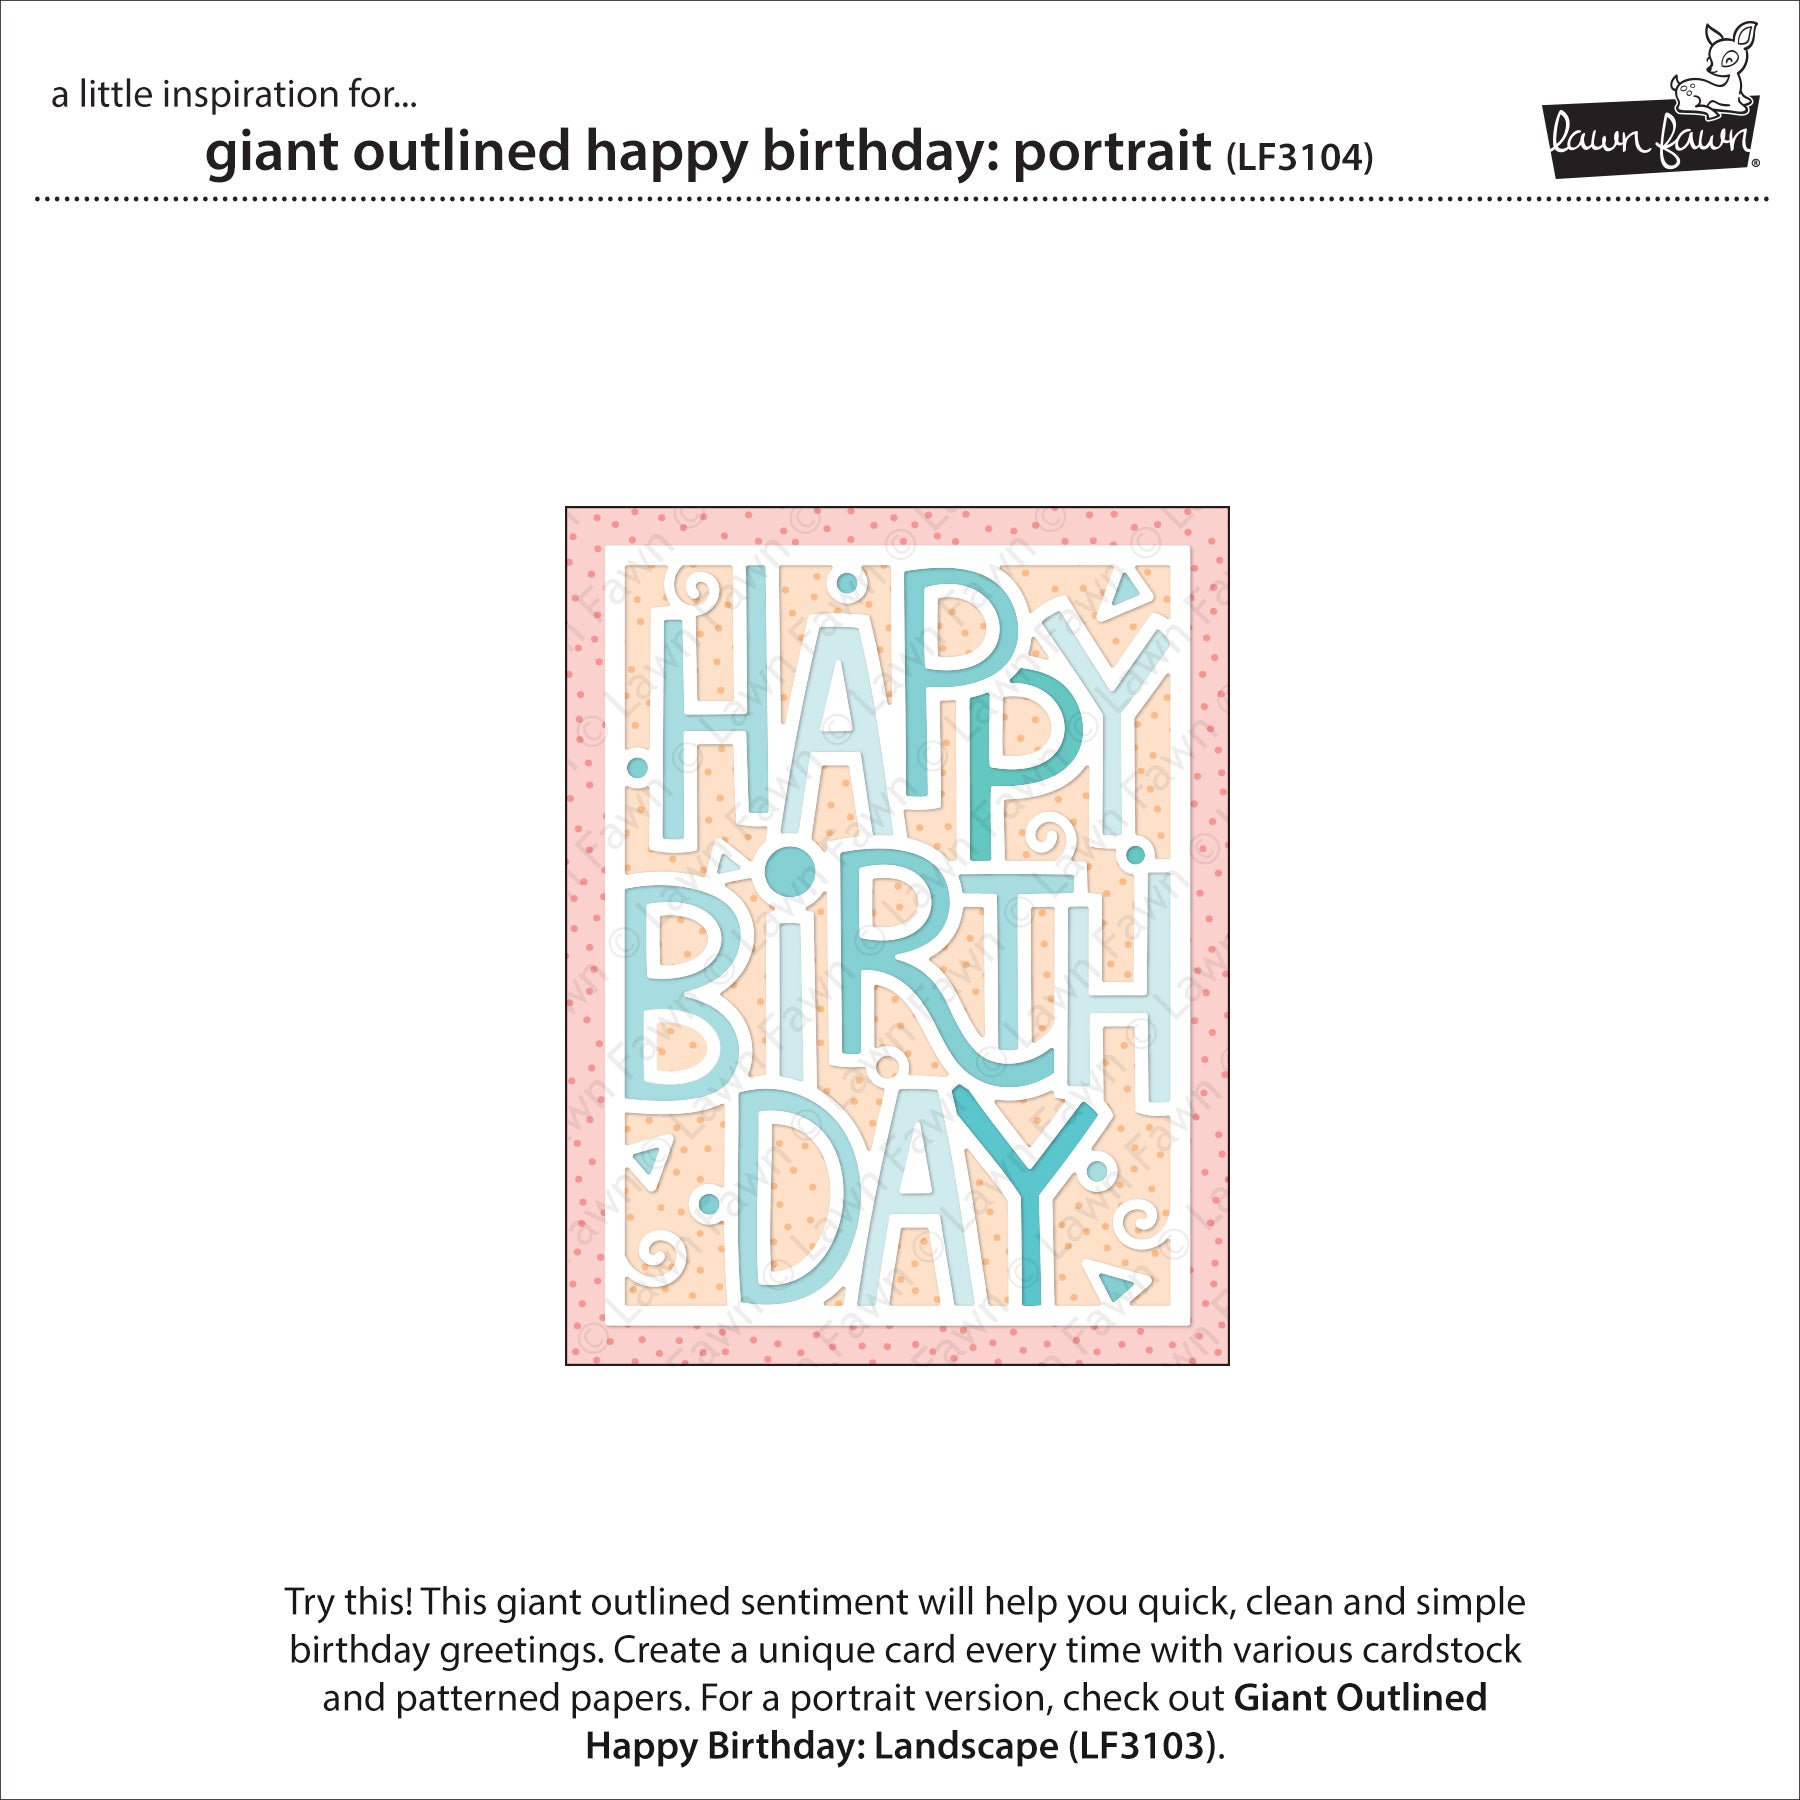 giant outlined happy birthday: portrait